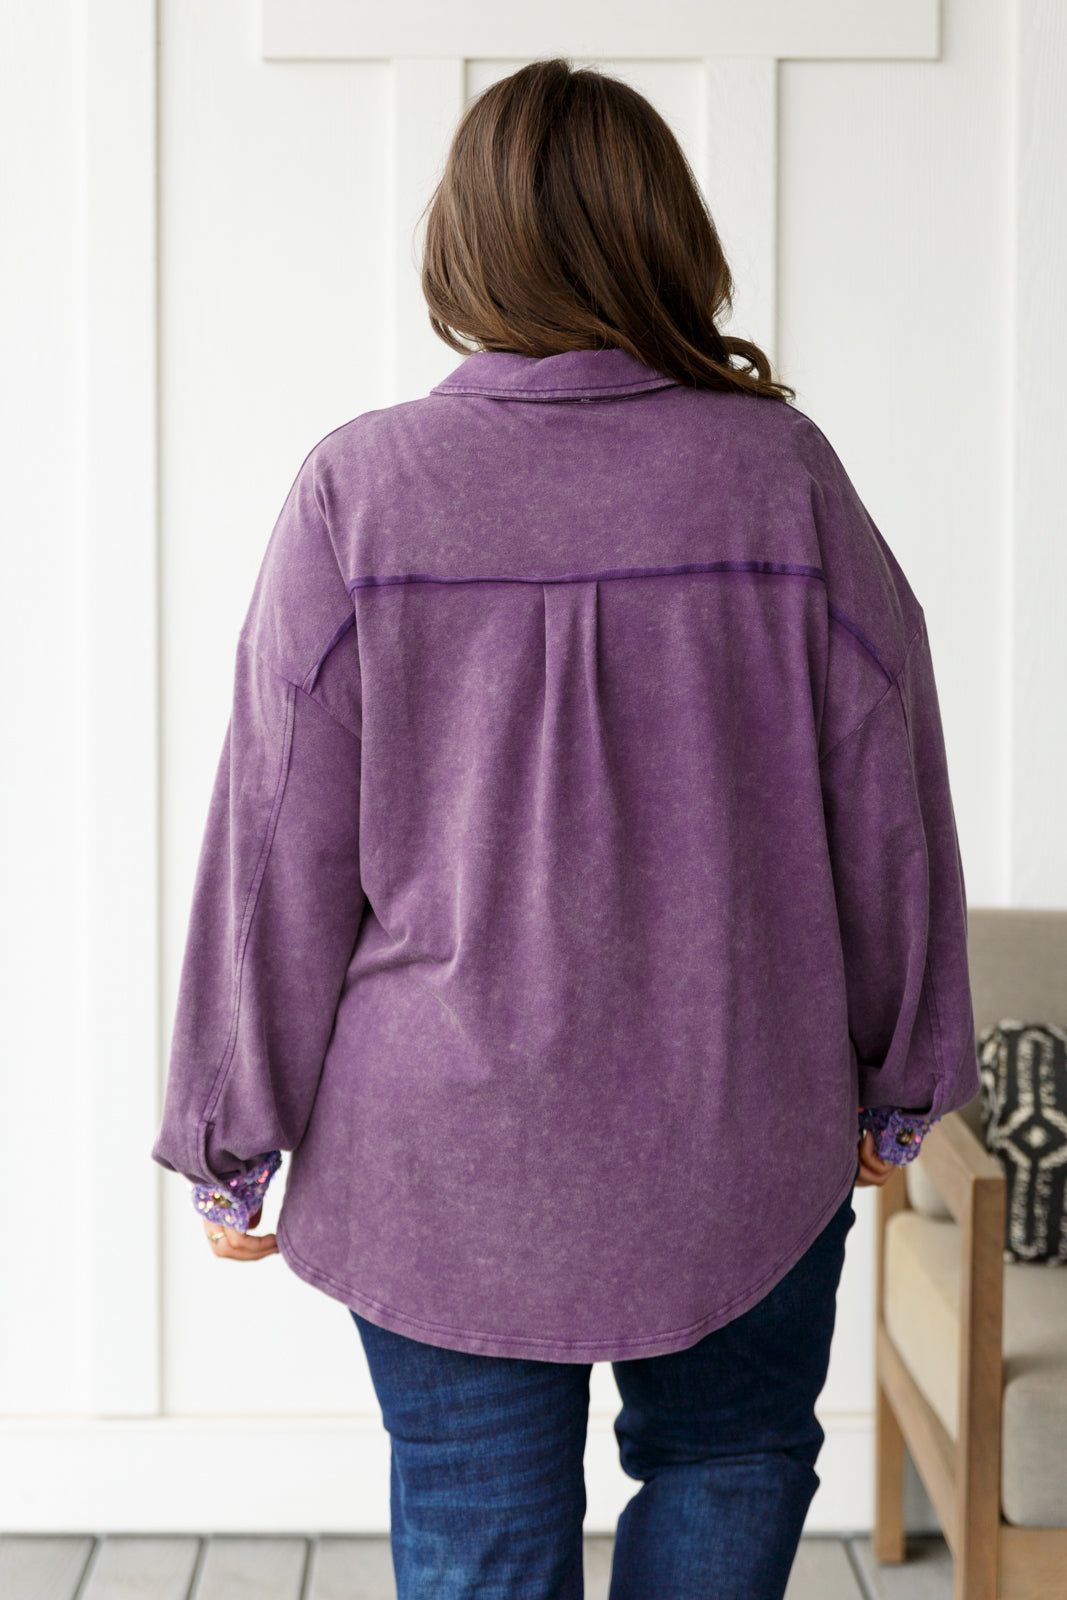 Chaos of Sequins Shacket in Purple Womens Southern Soul Collectives